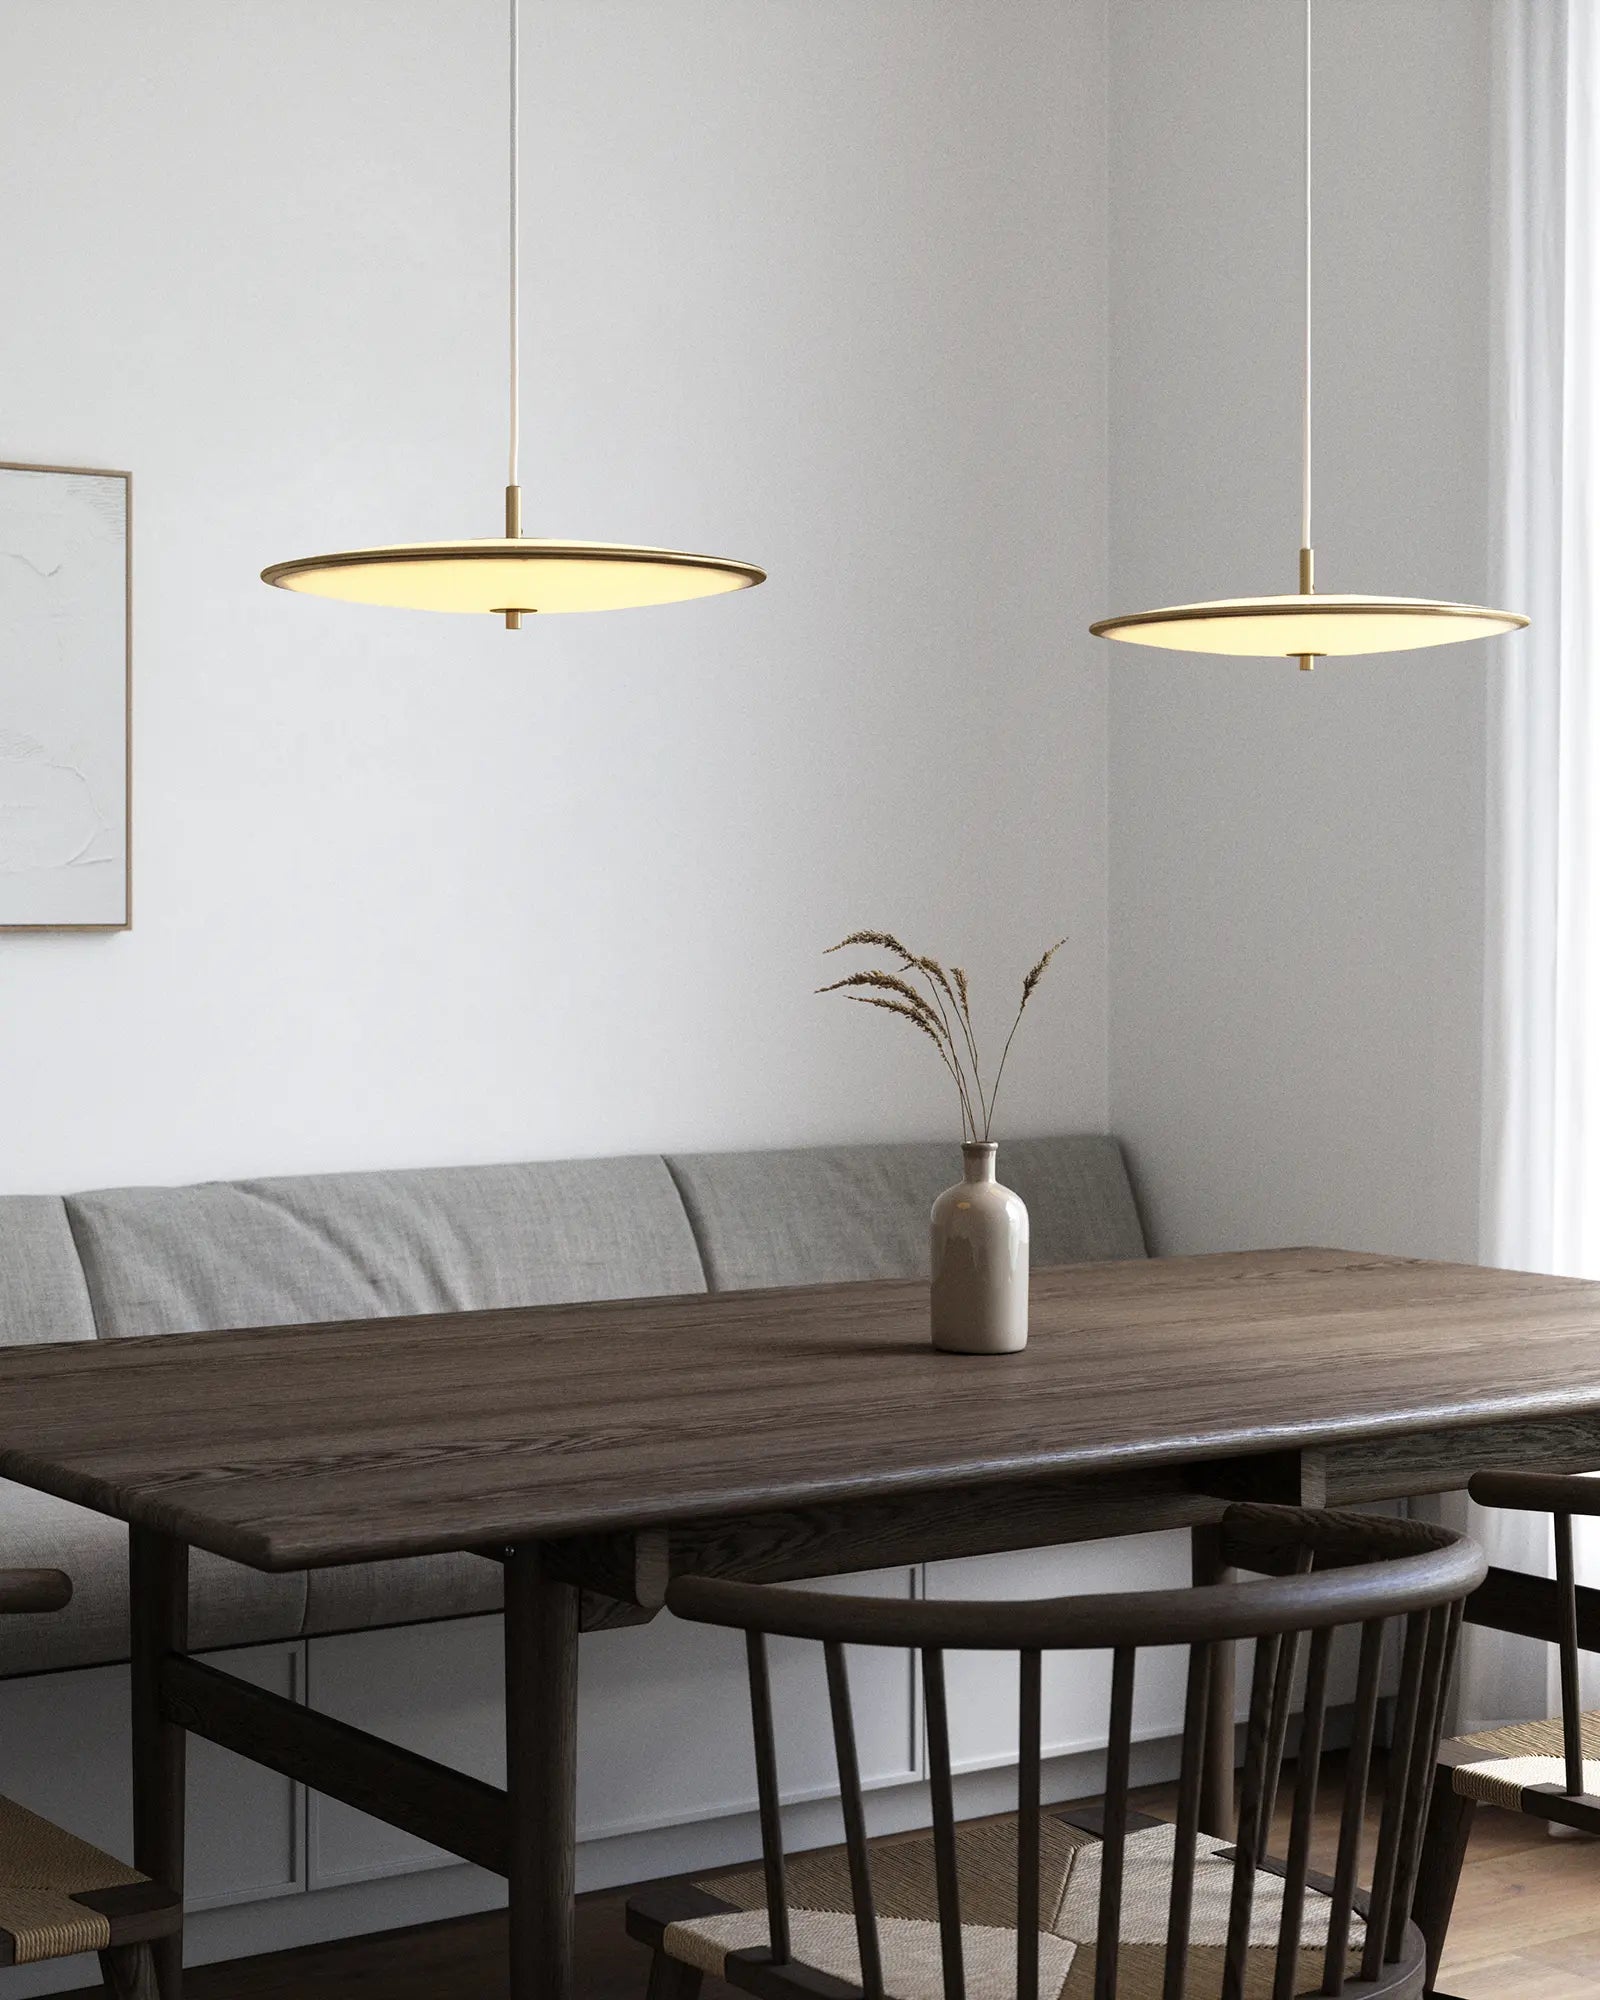 Blanche pendant light cluster over a dining table